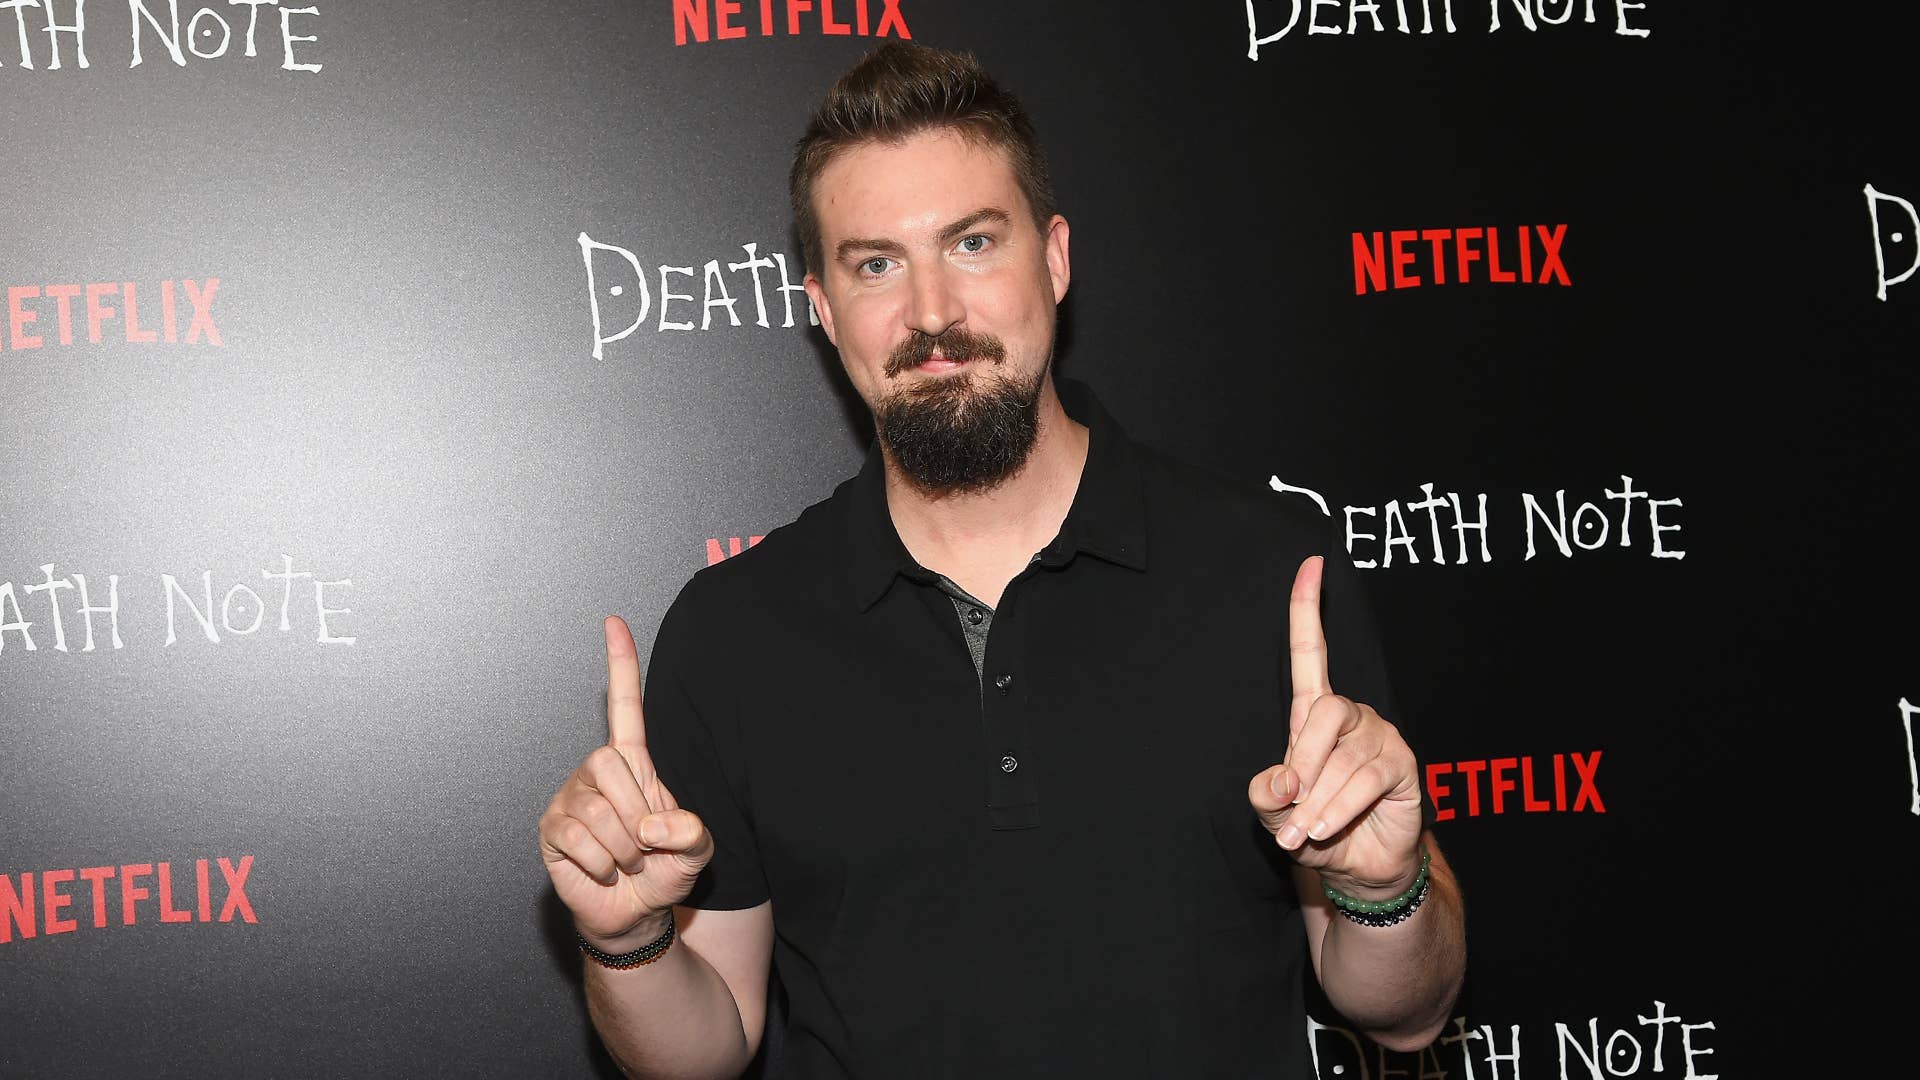 Adam Wingard attends the "Death Note' New York premiere.